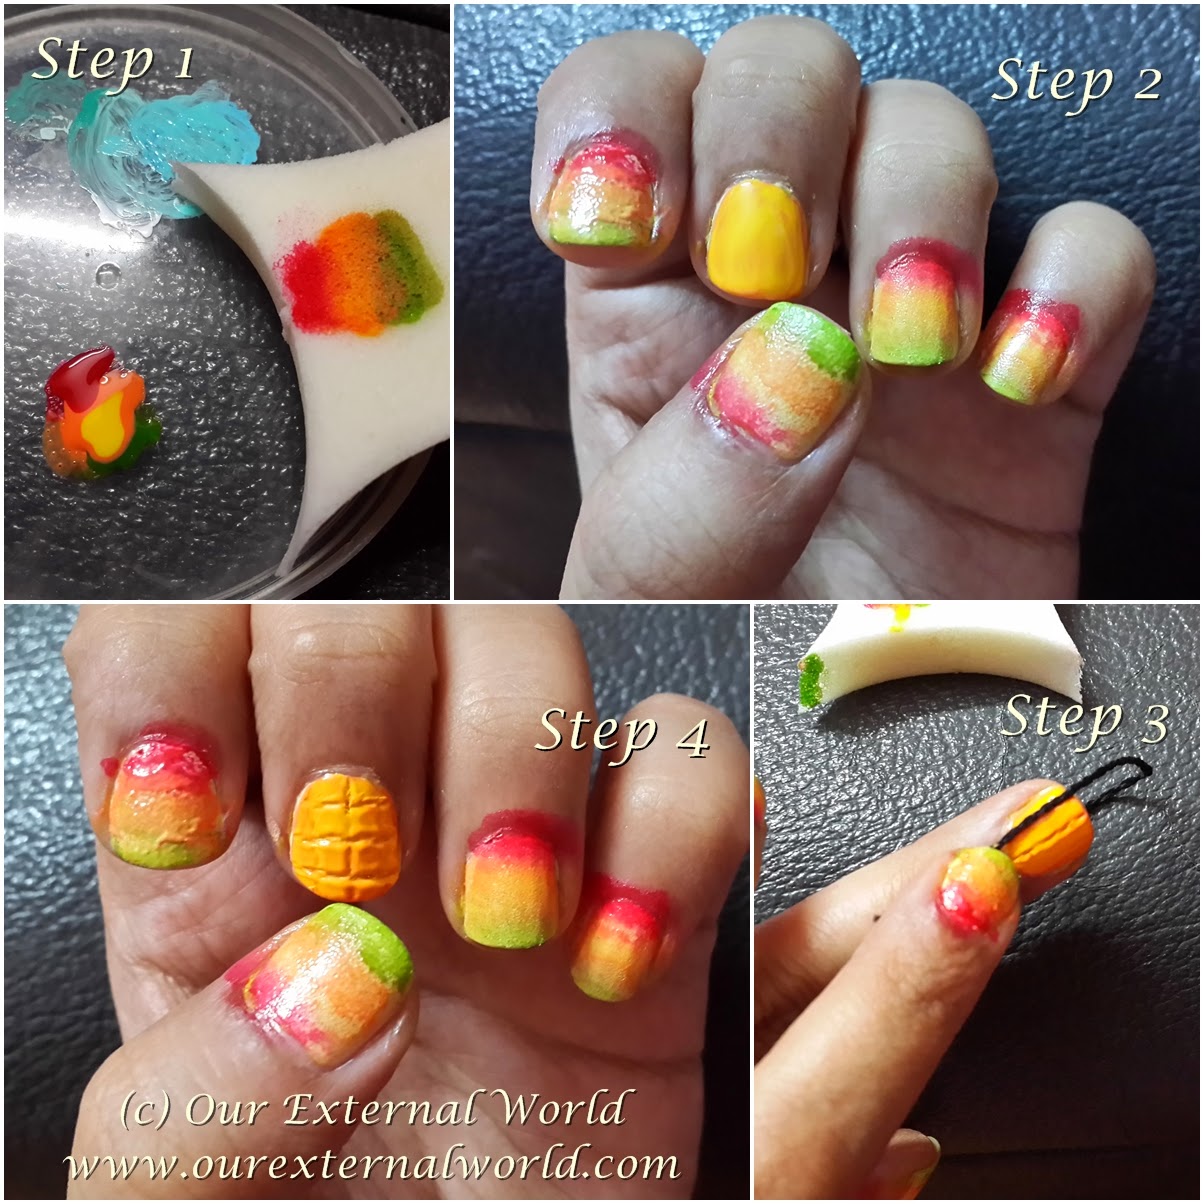 DIY nail art: How to do tropical palm trees using a straw and sponge